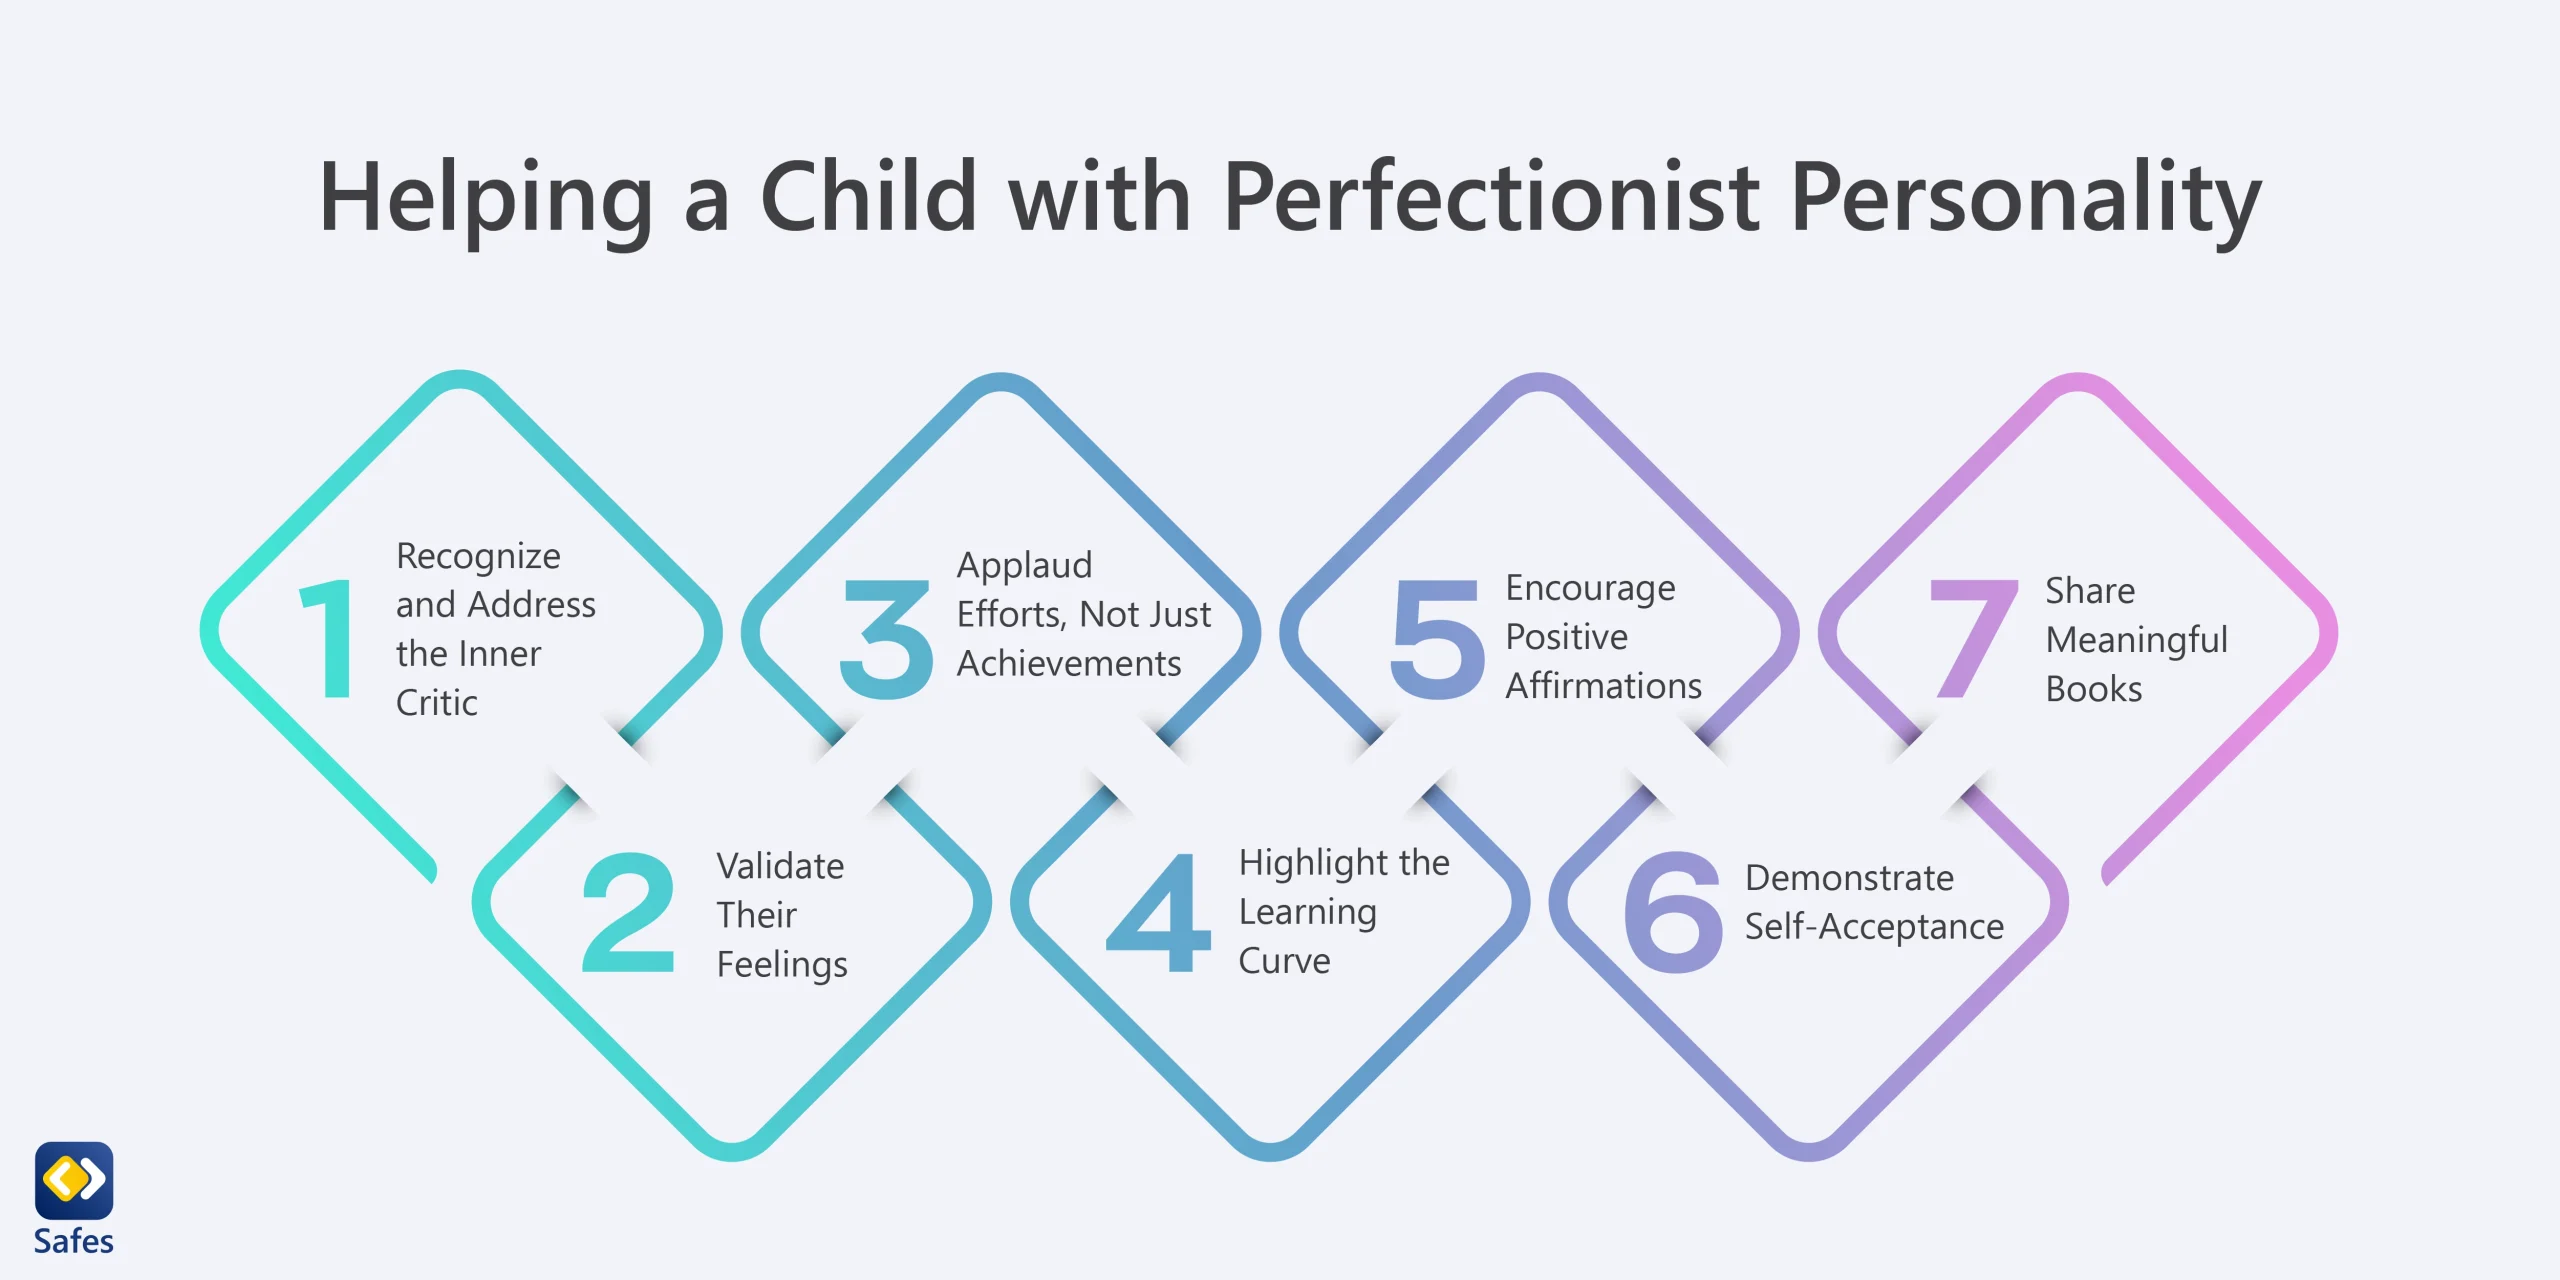 Helping a Child with Perfectionist Personality